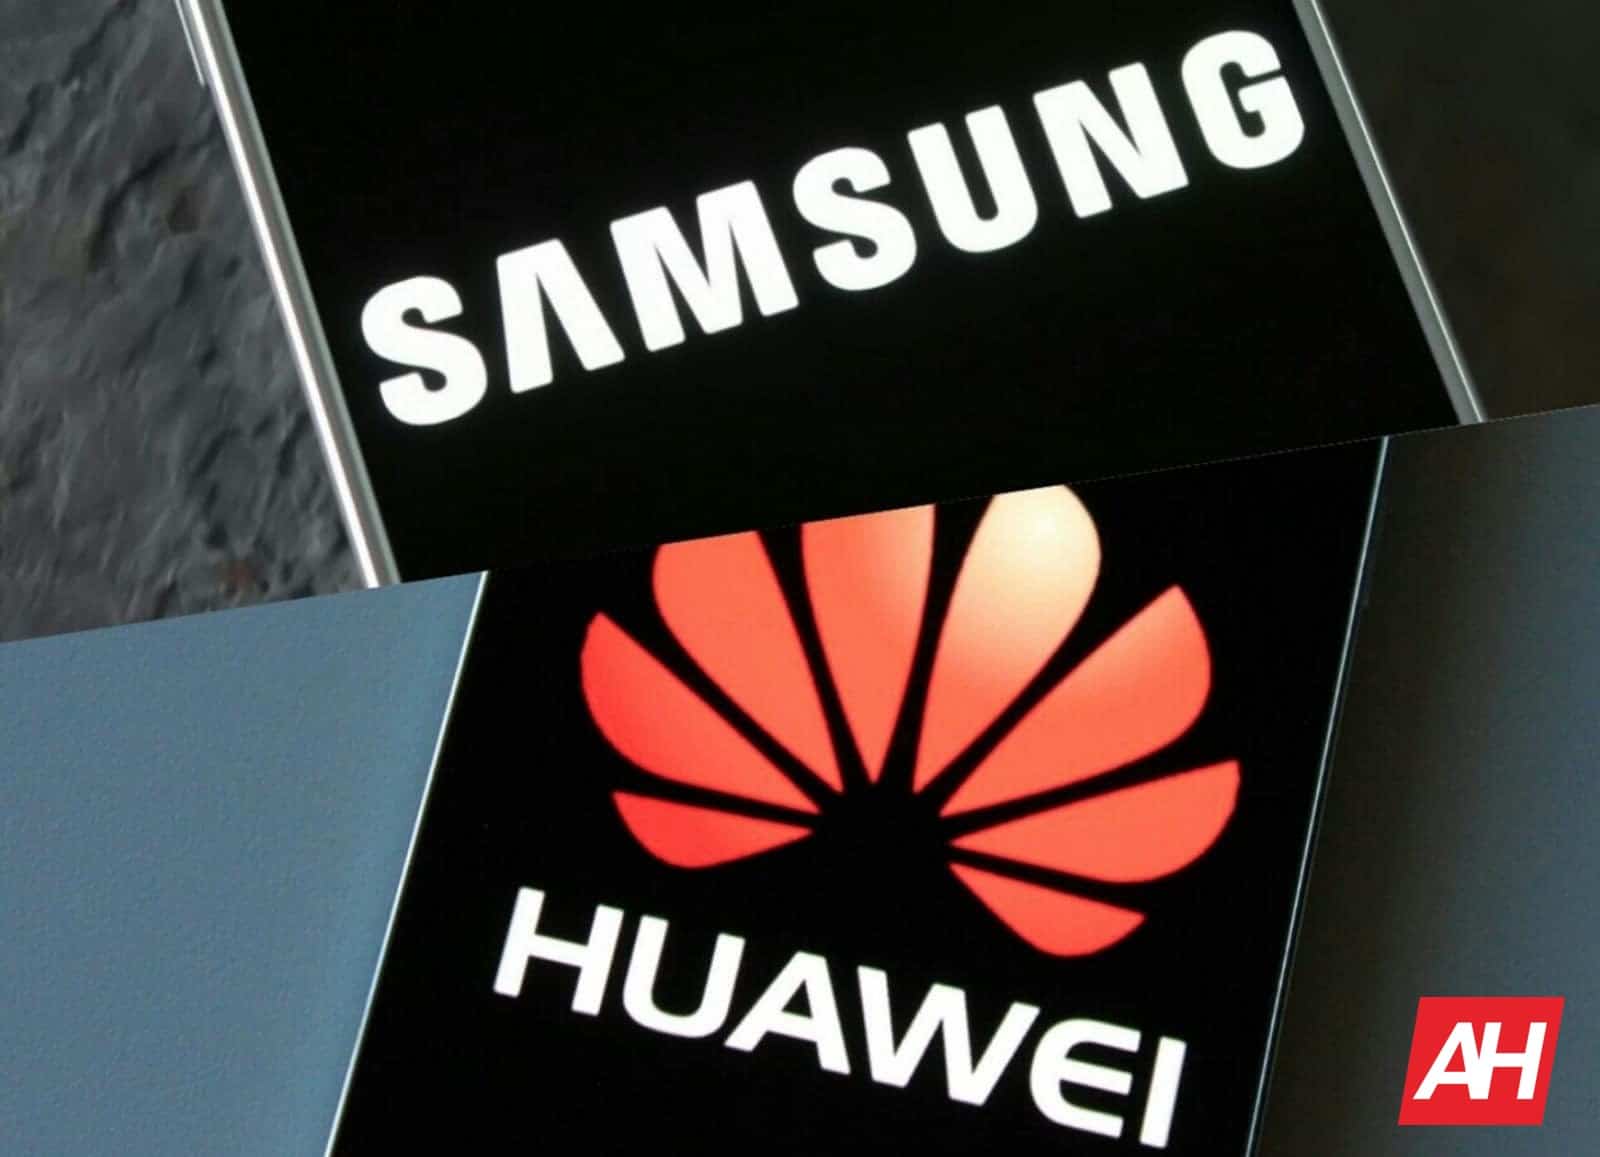 The head of Huawei belittled Samsung and said that if it were not for the U.S. sanctions, Apple and Huawei would dominate the smartphone market